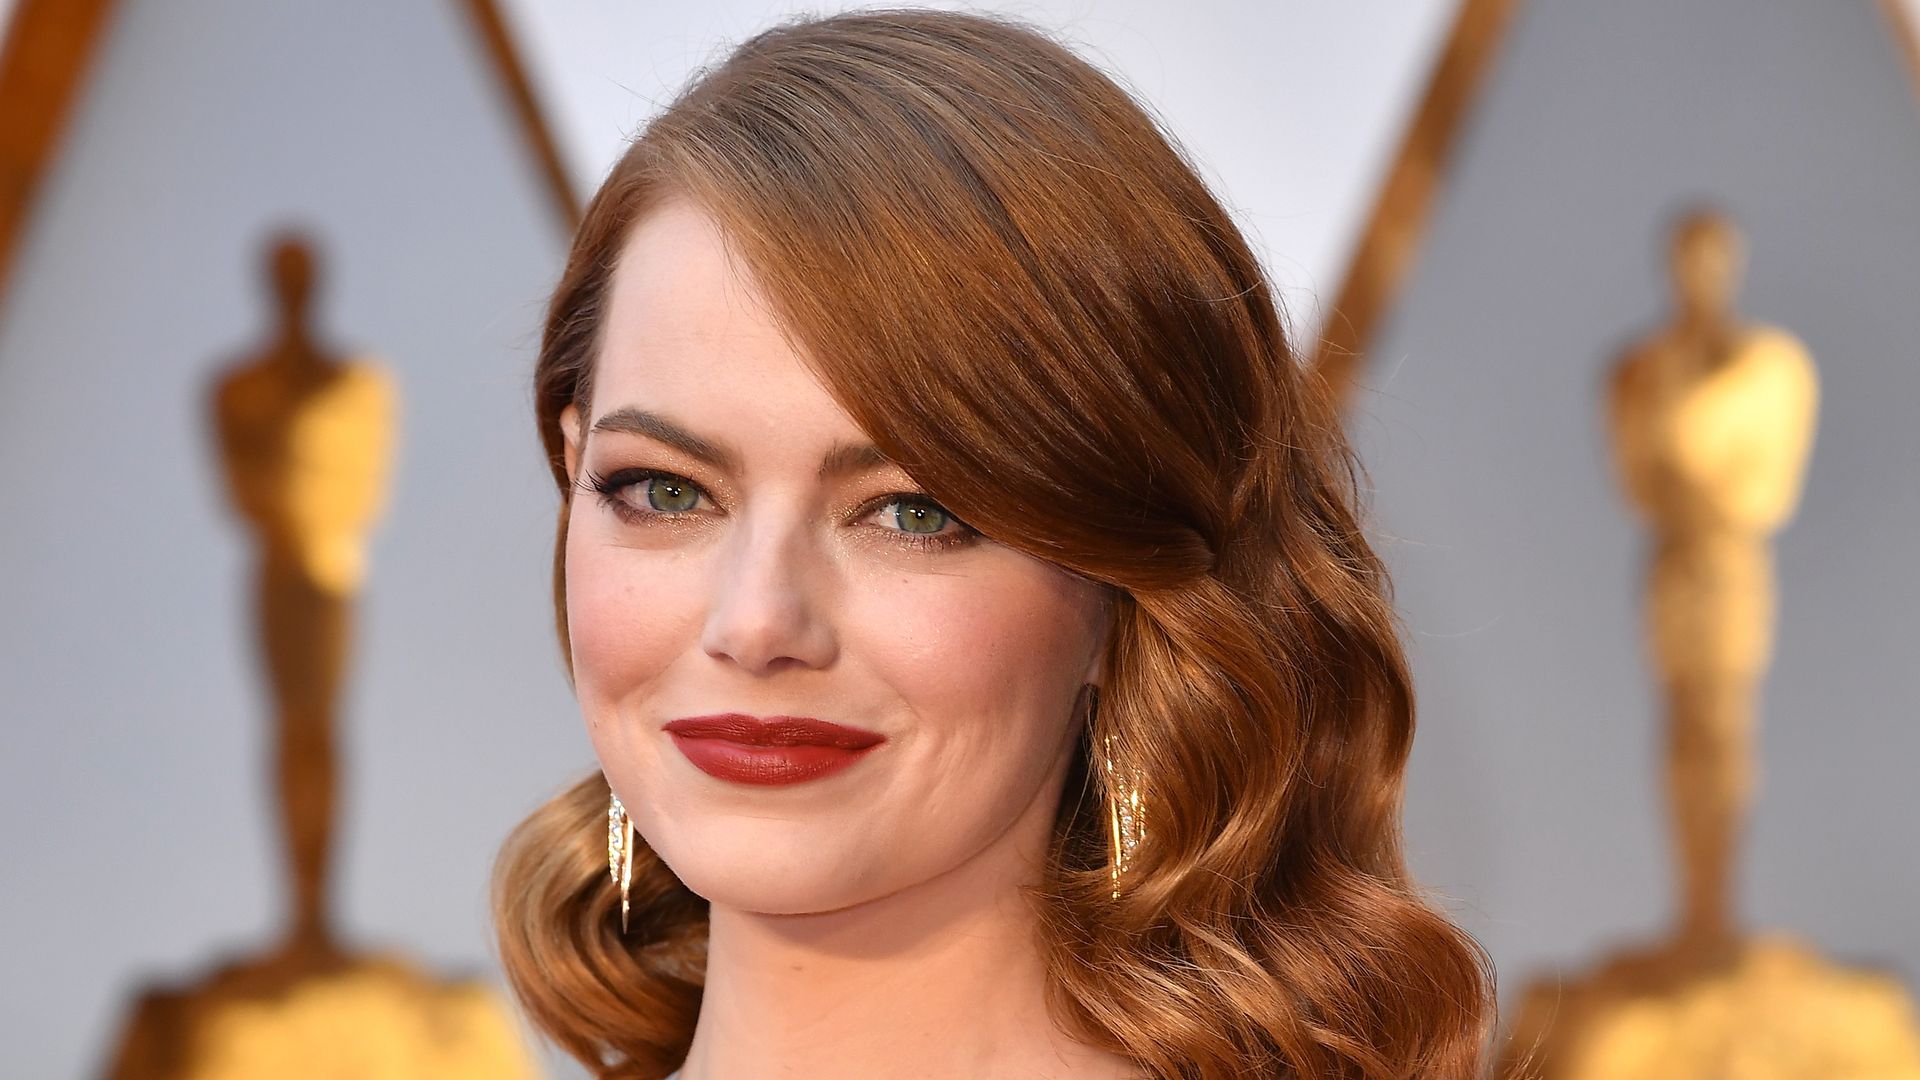 Emma Stone attends the 89th Annual Academy Awards at Hollywood & Highland Center on February 26, 2017 in Hollywood, California